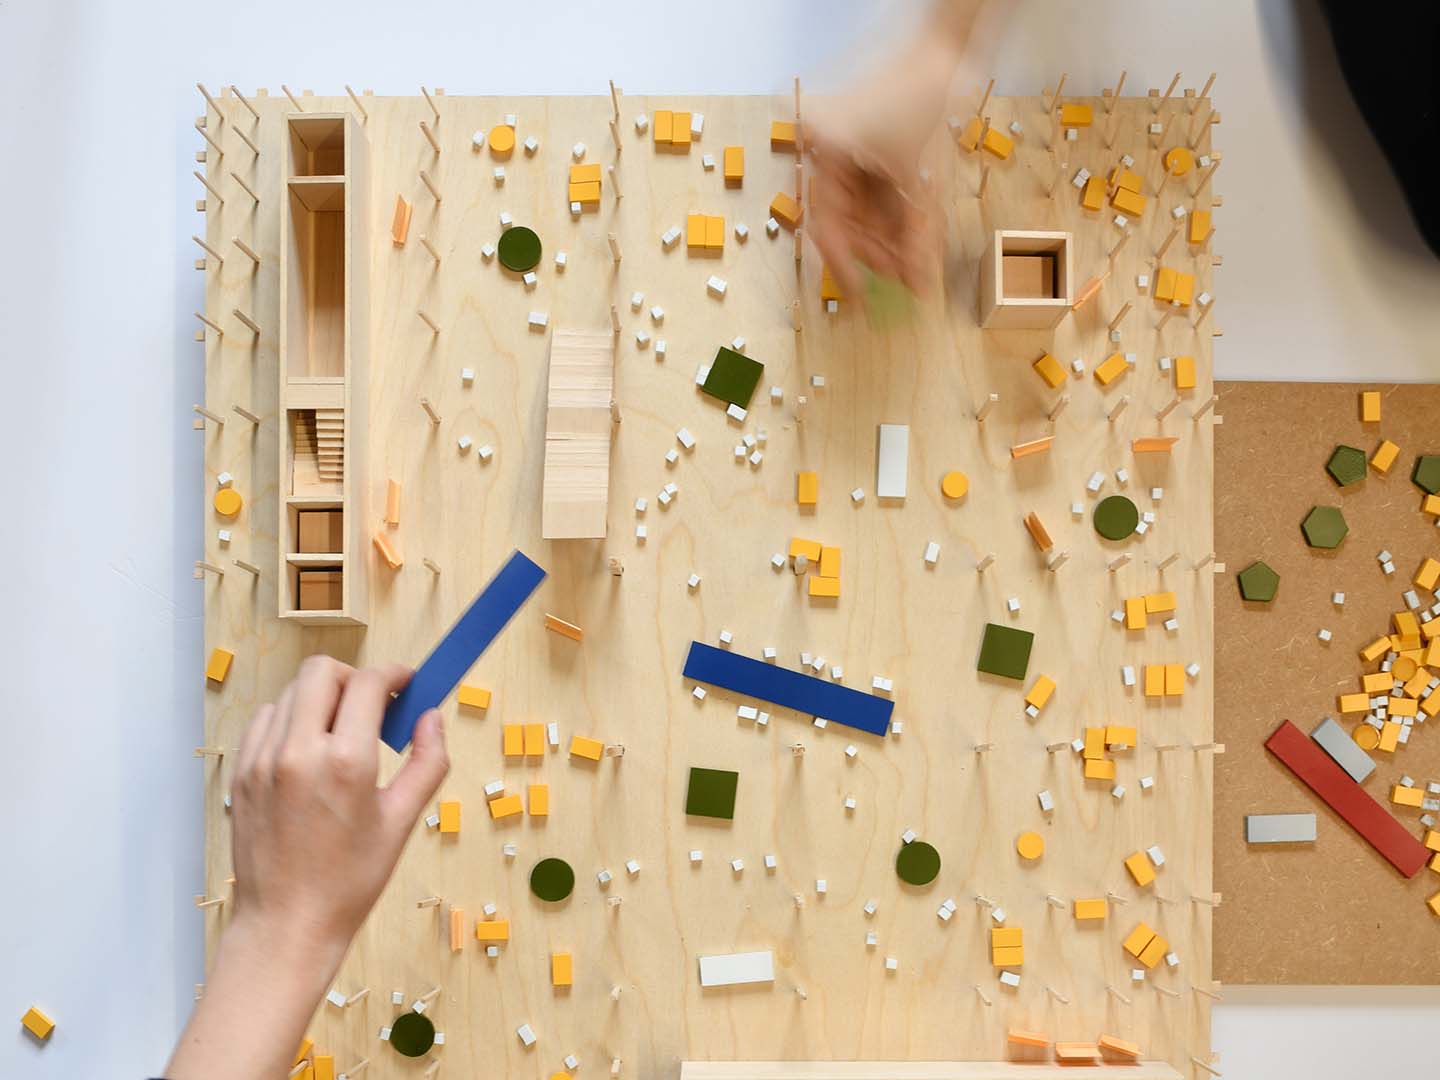 Overhead shot of two hands placing blocks on a graphic wooden and painted architectural model.